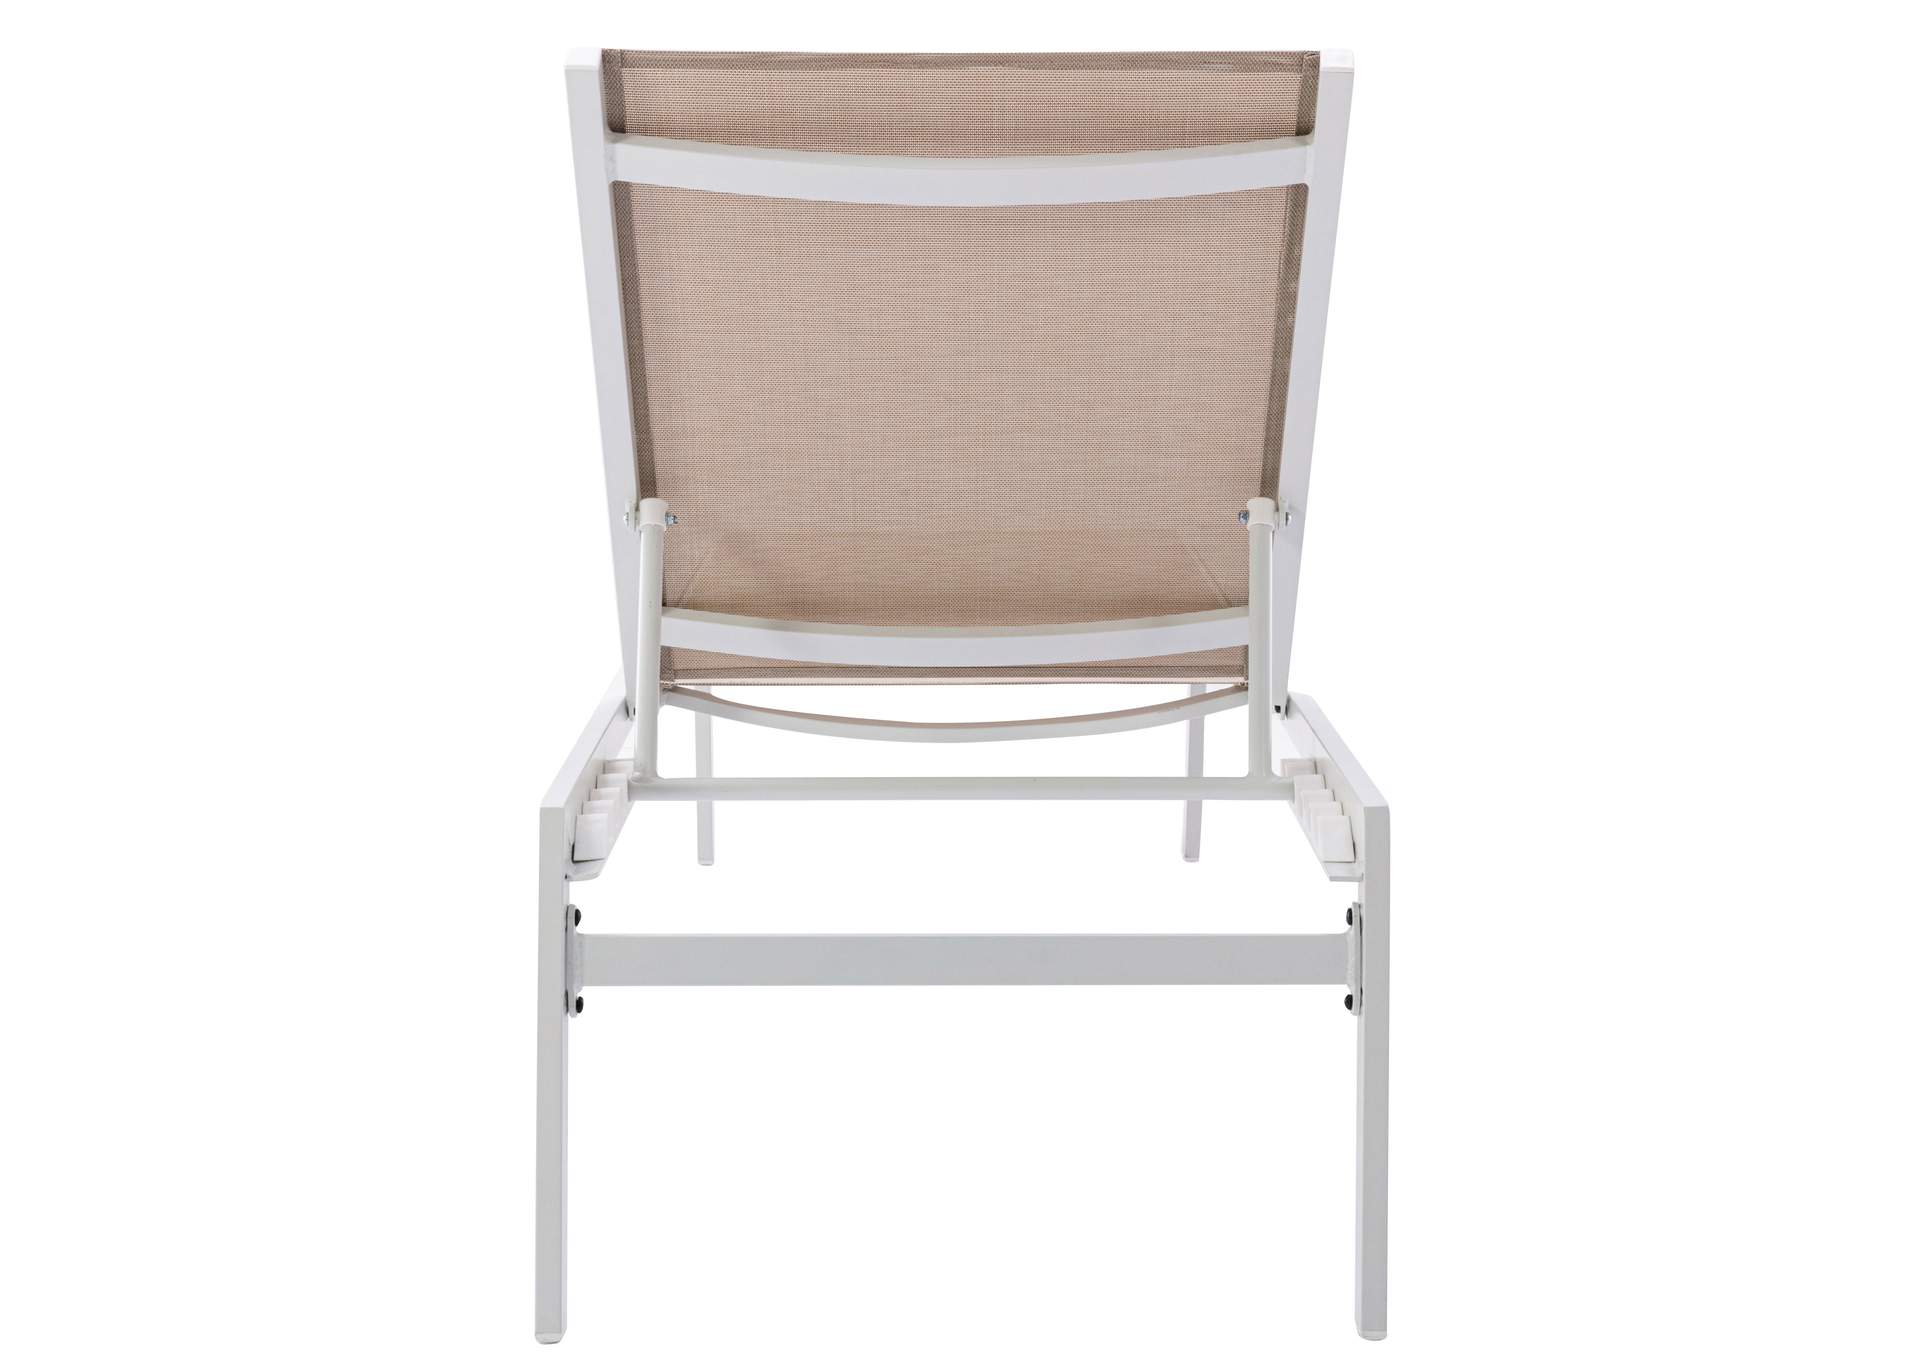 Santorini Beige Resilient Mesh Water Resistant Fabric Outdoor Patio Aluminum Mesh Chaise Lounge Chair,Meridian Furniture